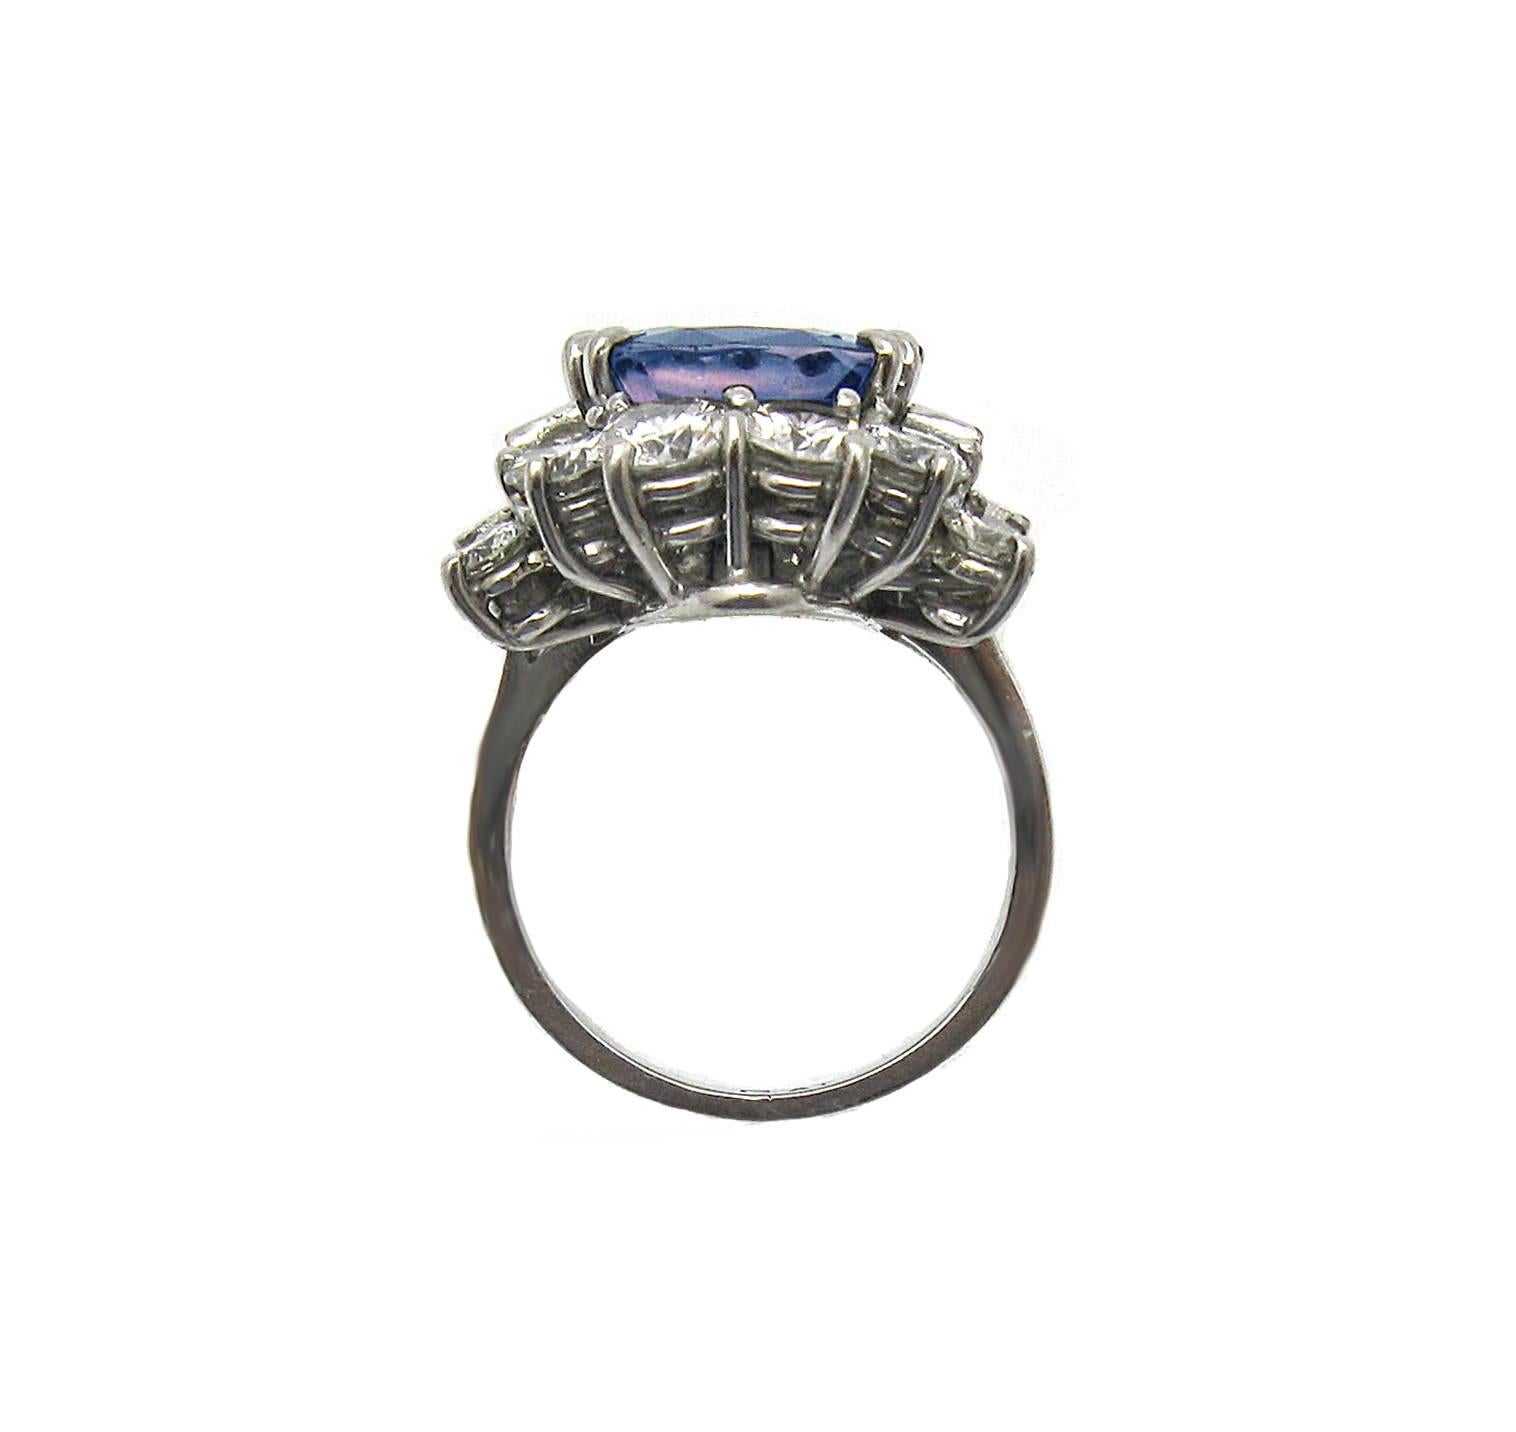 This creative sapphire and diamond piece will serve you two ways: as a ring or a pendant! Featuring a 6.57ct cushion cut Sapphire, un-heated and GIA certified. The center sapphire is framed by 16 baguette and round diamonds totaling over 3.20ct,